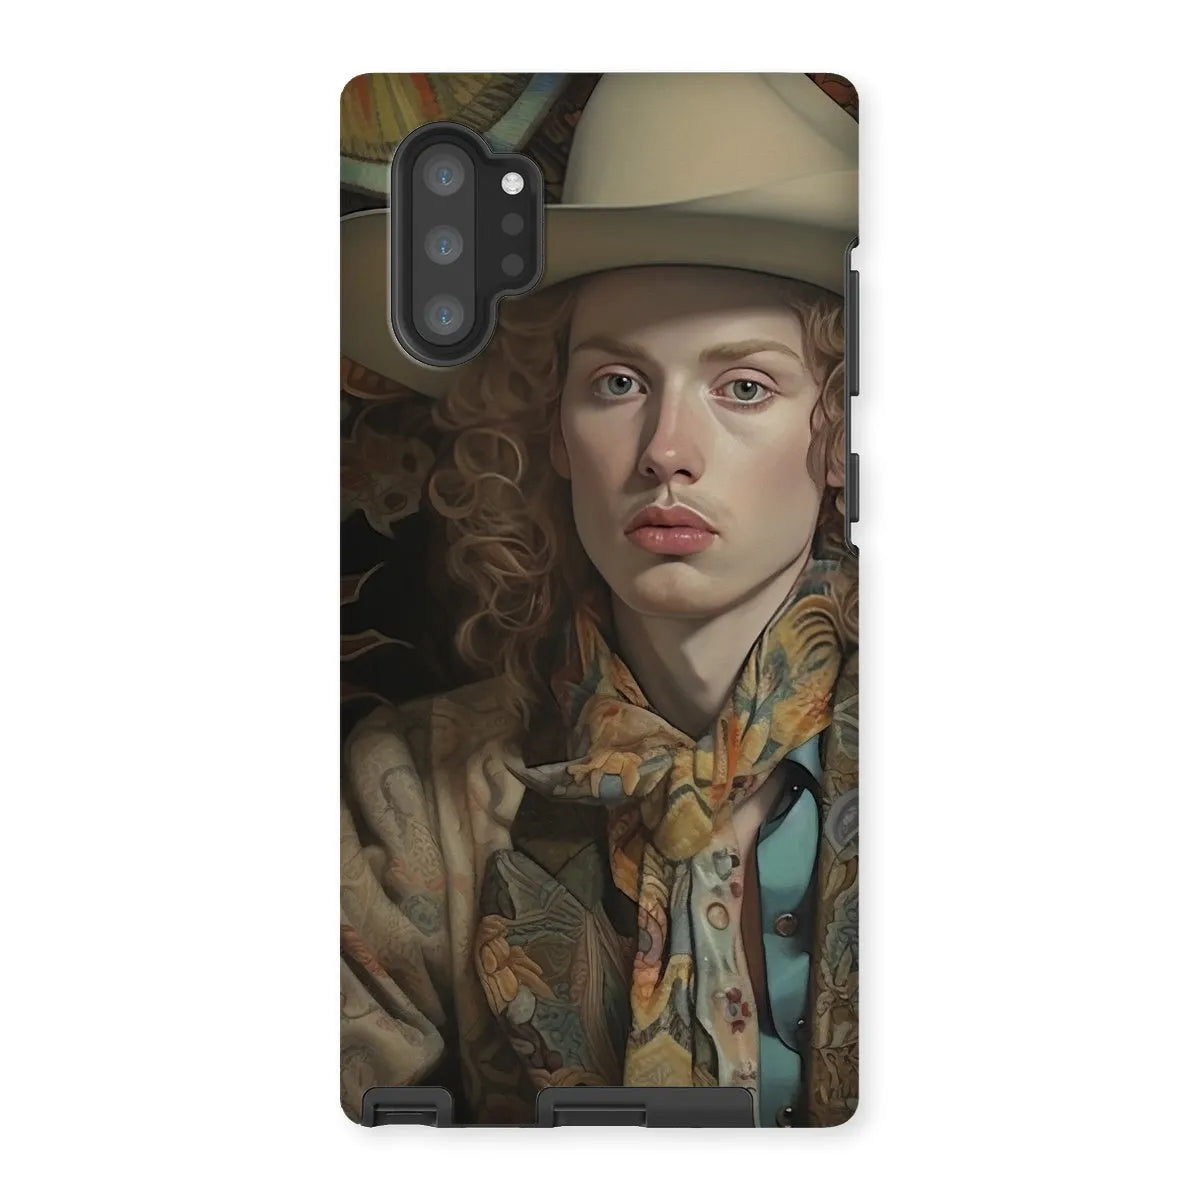 Ollie The Transgender Cowboy - F2m Dandy Outlaw Phone Case - Samsung Galaxy Note 10p / Matte - Mobile Phone Cases